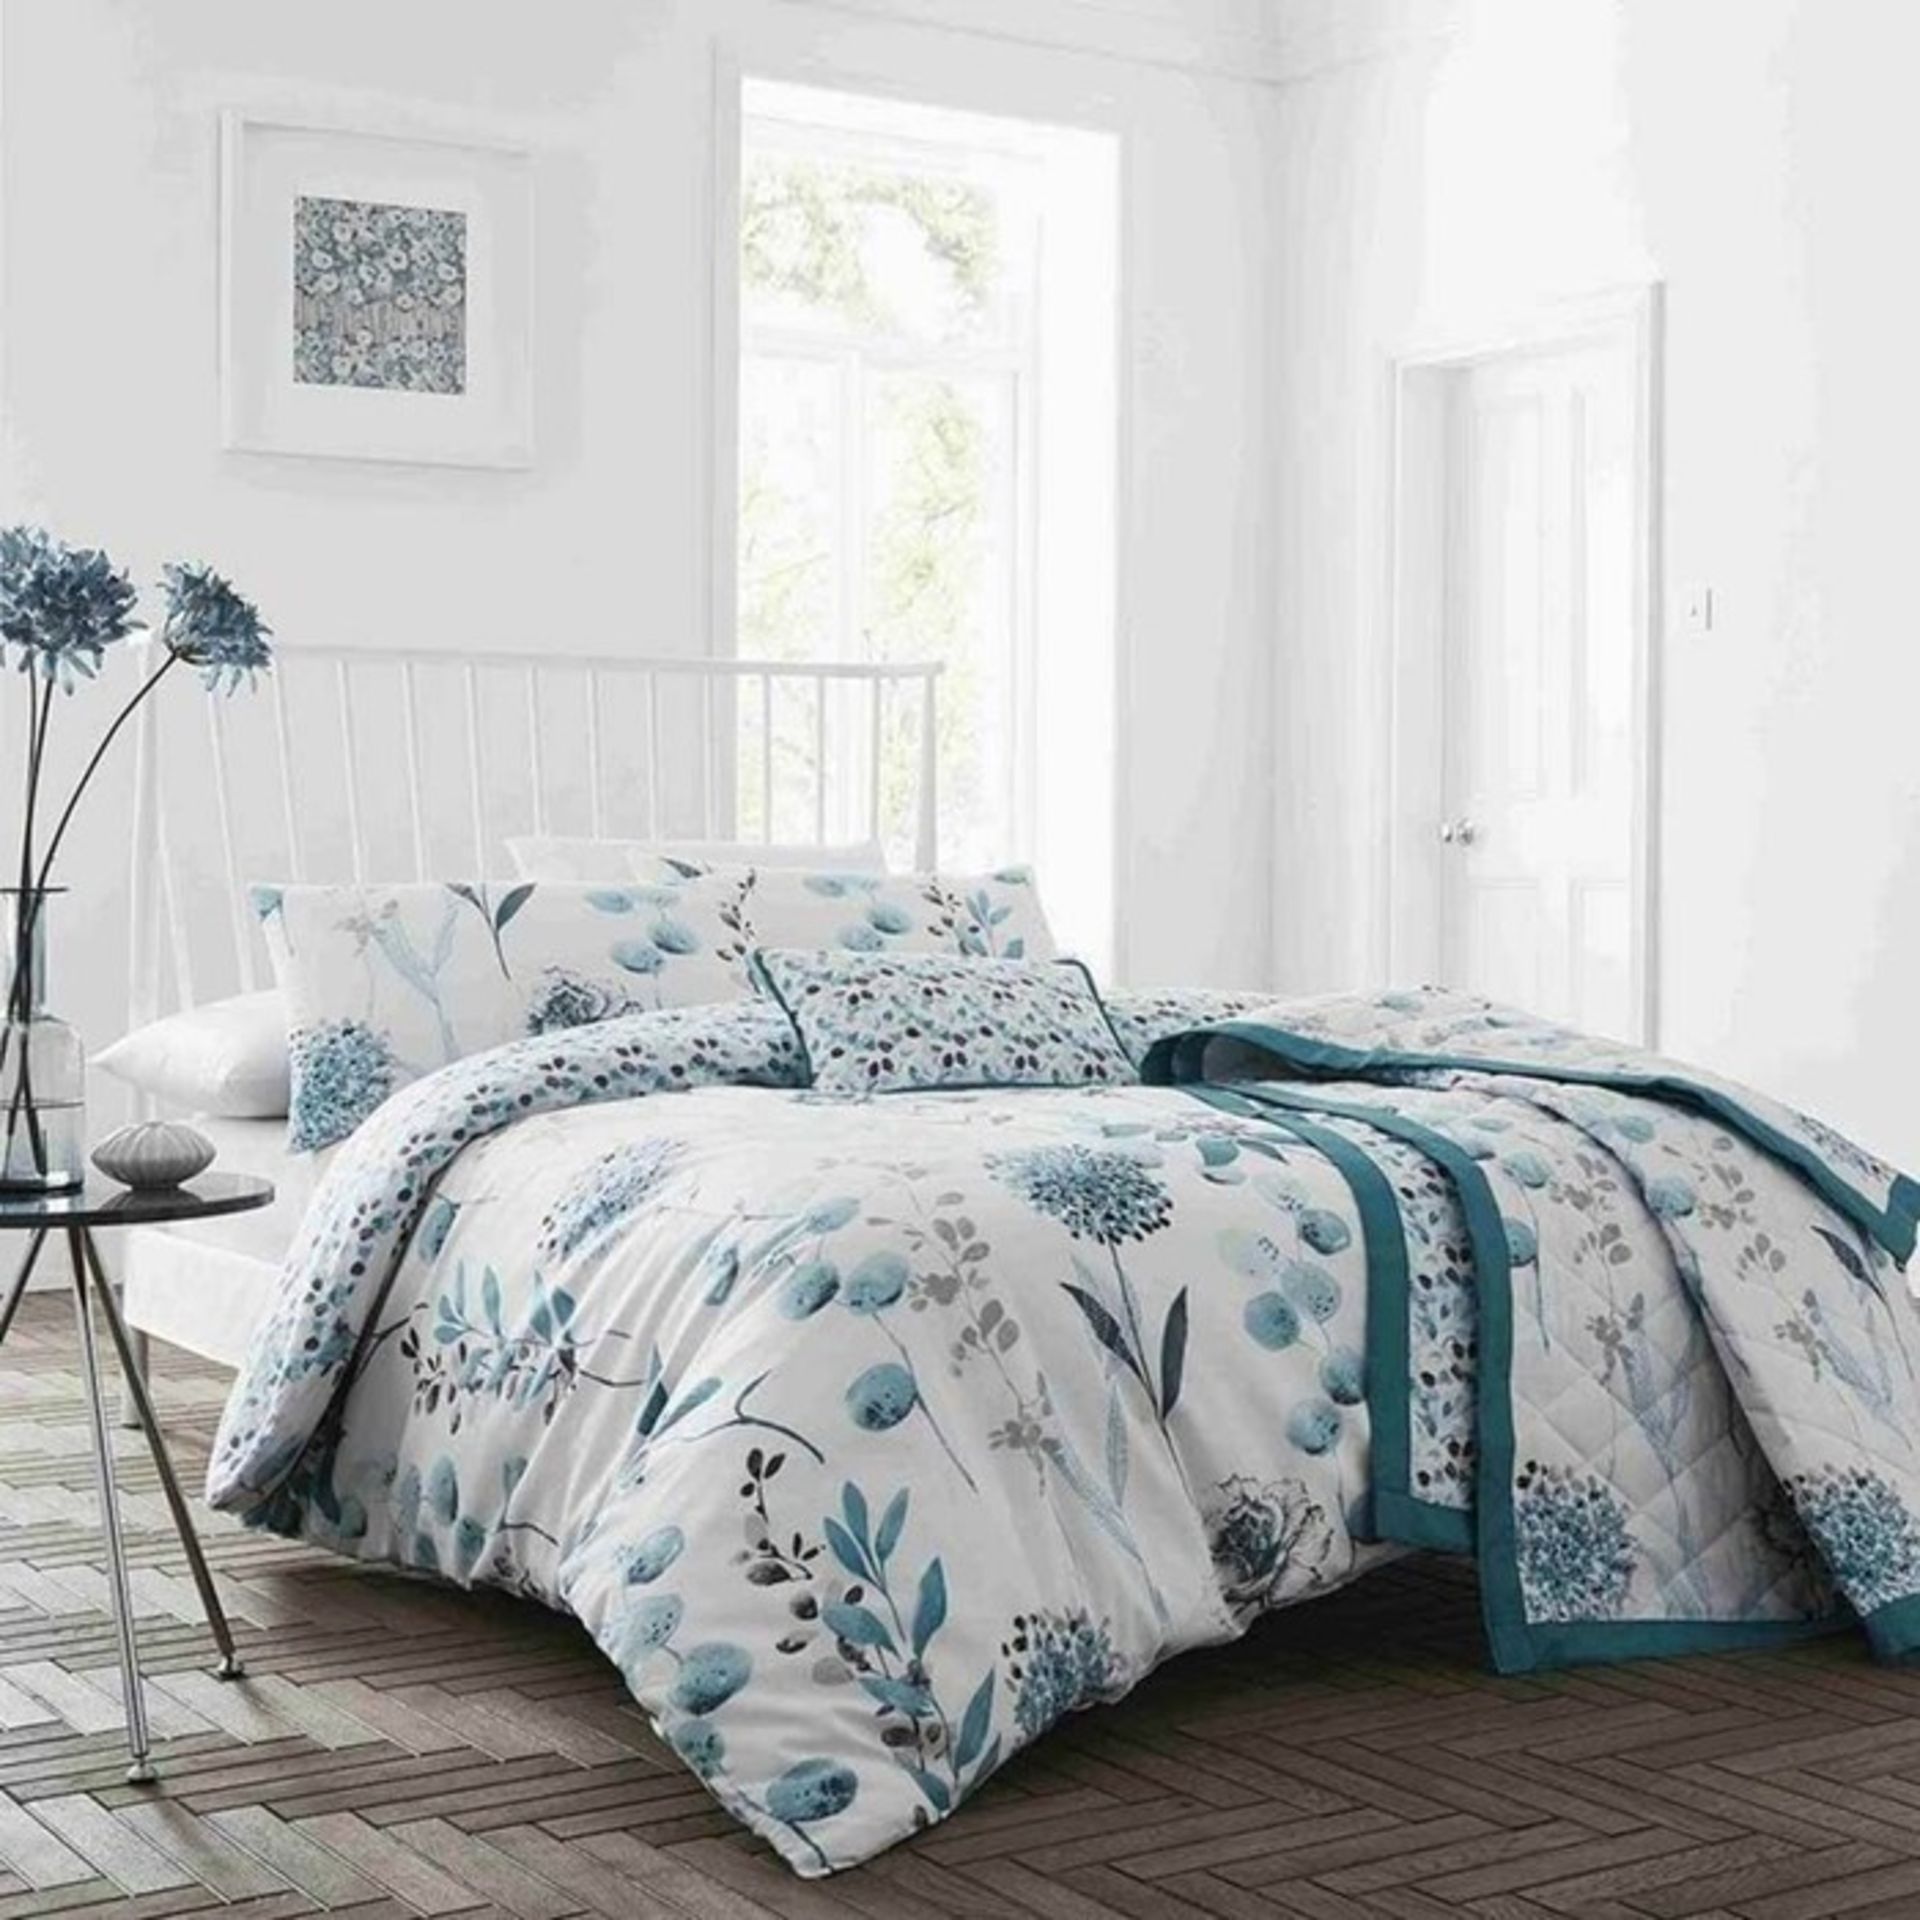 Lily Manor, Yair 200 TC Percale Duvet Cover Set (SINGLE)(TEAL) - RRP £17.99 (GCEA1026 - 19127/167)